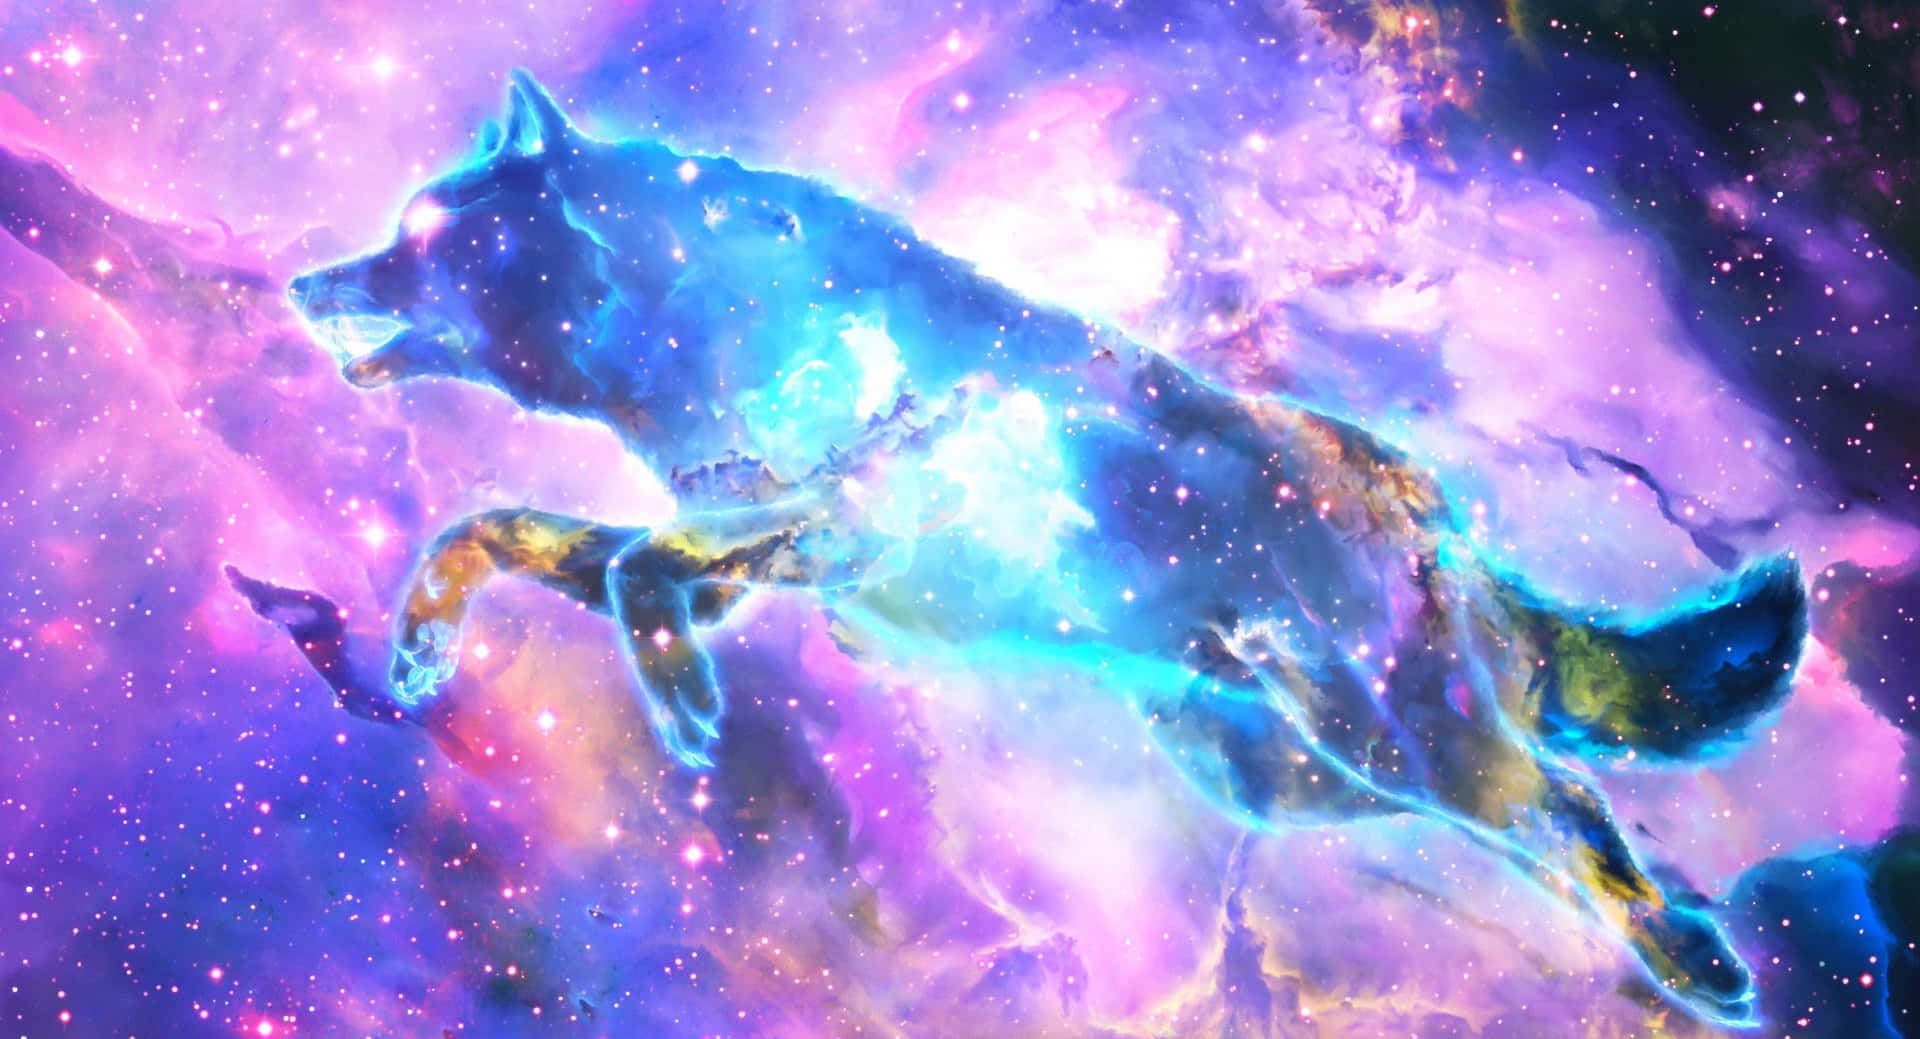 "Follow the Milky Way and search for the elusive Galactic Wolves" Wallpaper